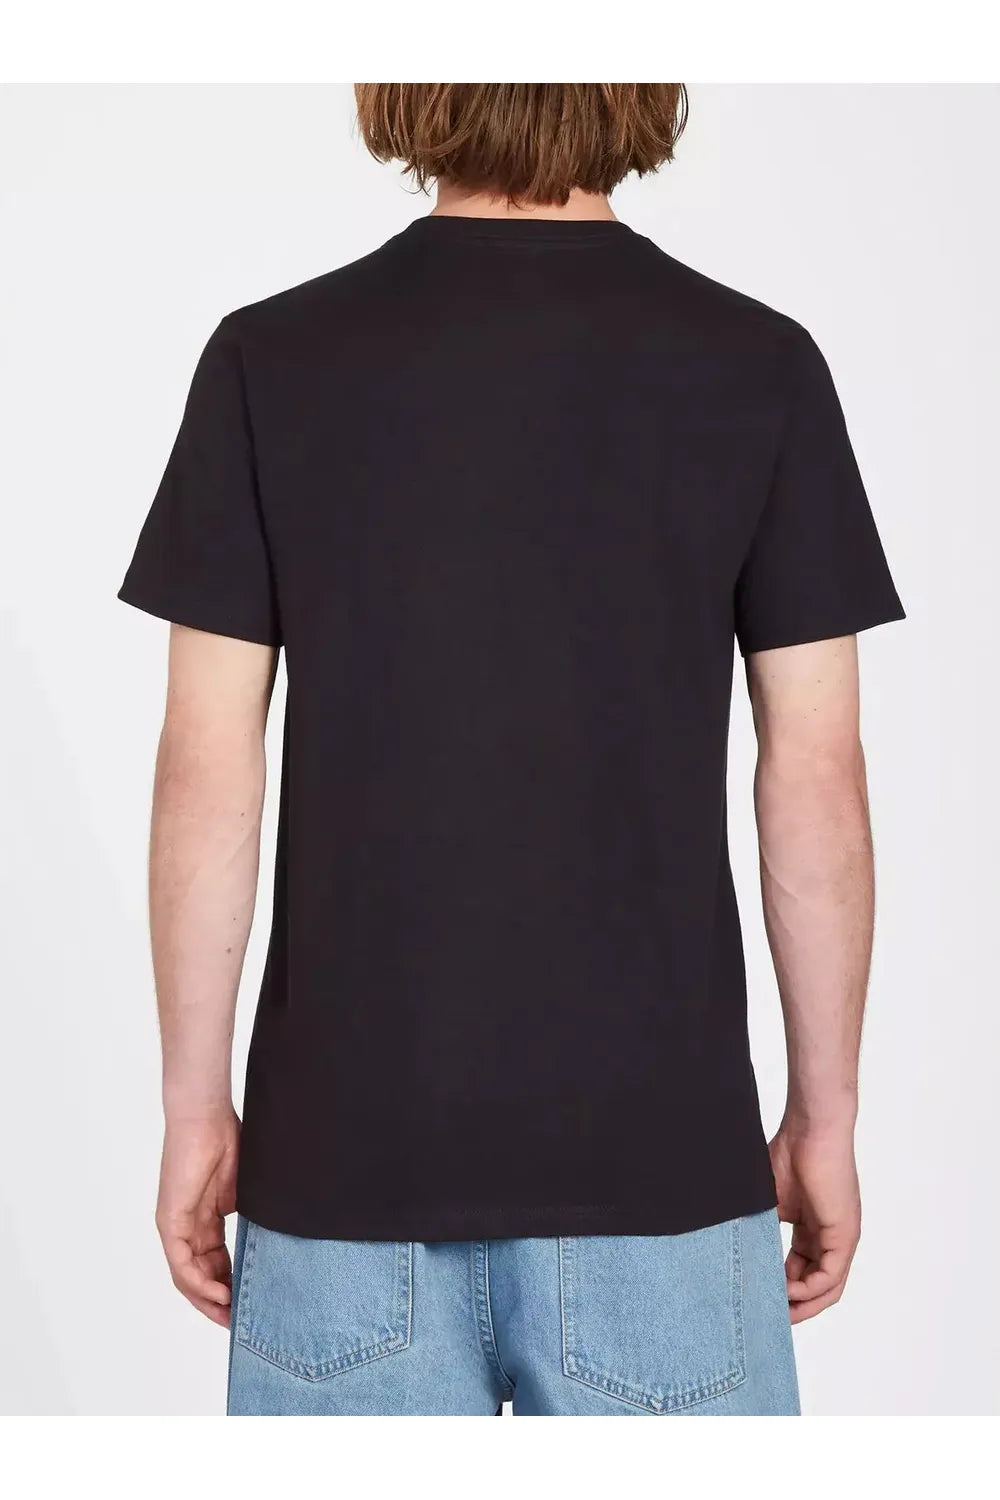 Volcom FA J Hager in Type SST T-Shirt